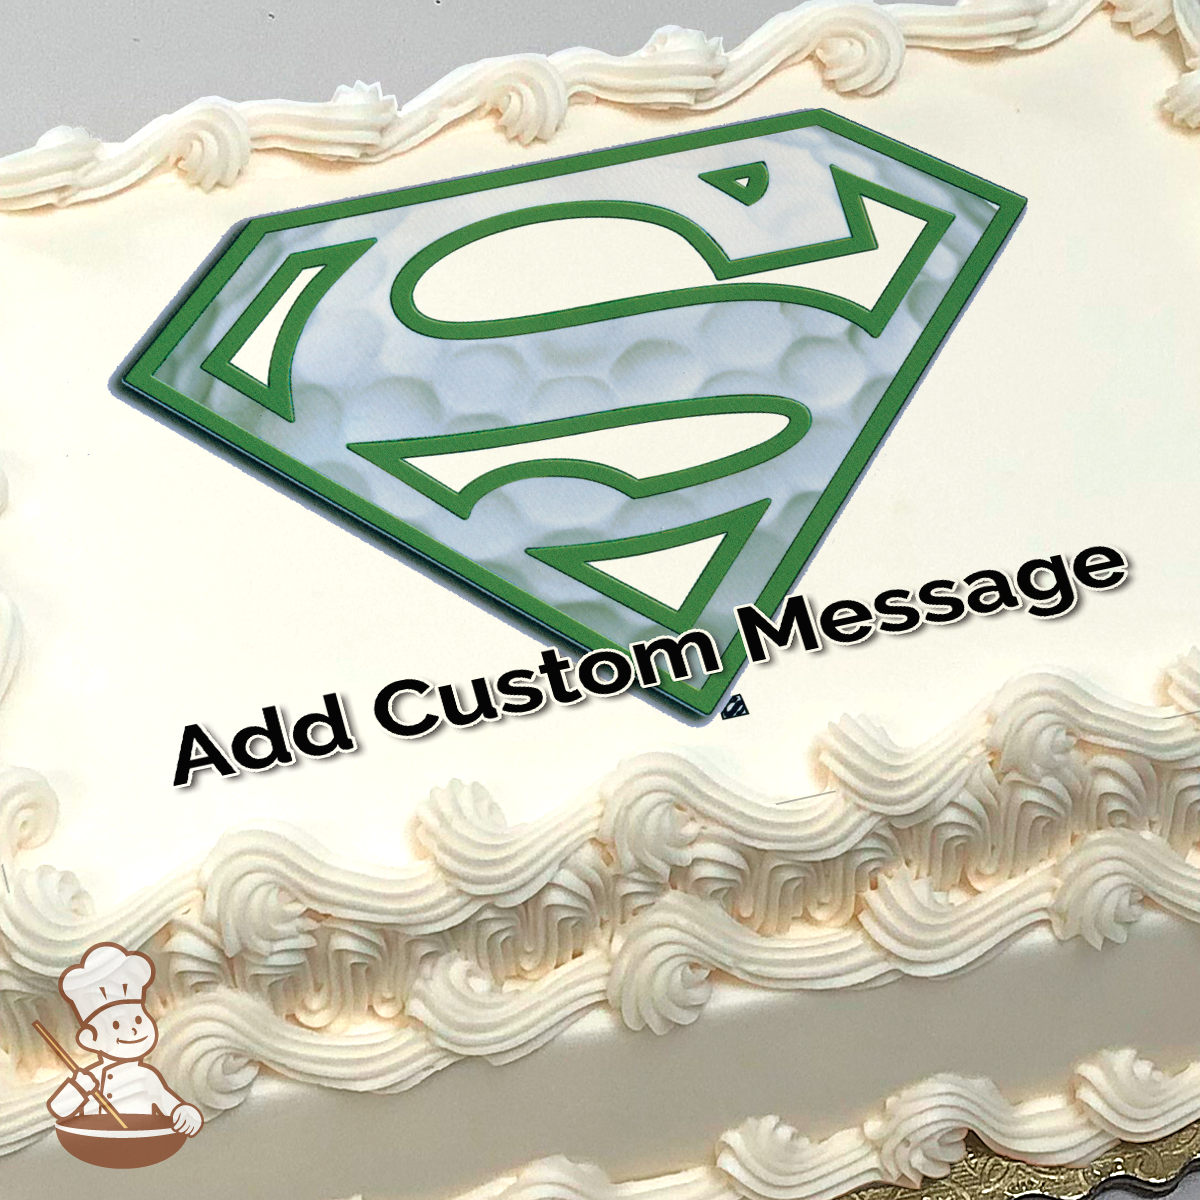 Superman Cake For Daddy Bong - CakeCentral.com